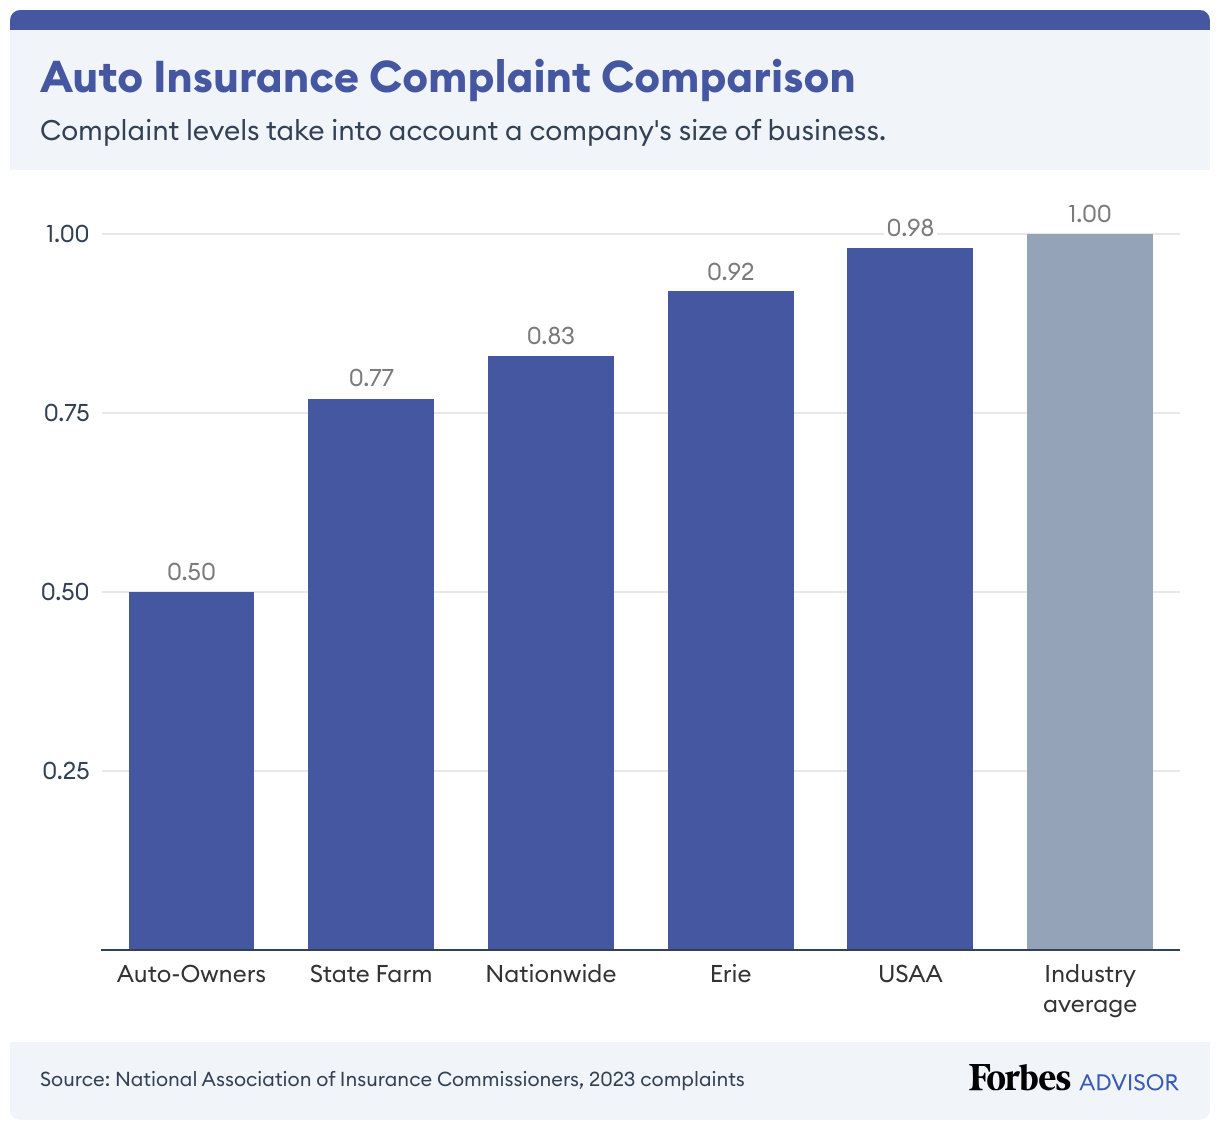 Auto-Owners has the lowest complaint level for auto insurance, and USAA the highest but is still below the industry average for complaints.